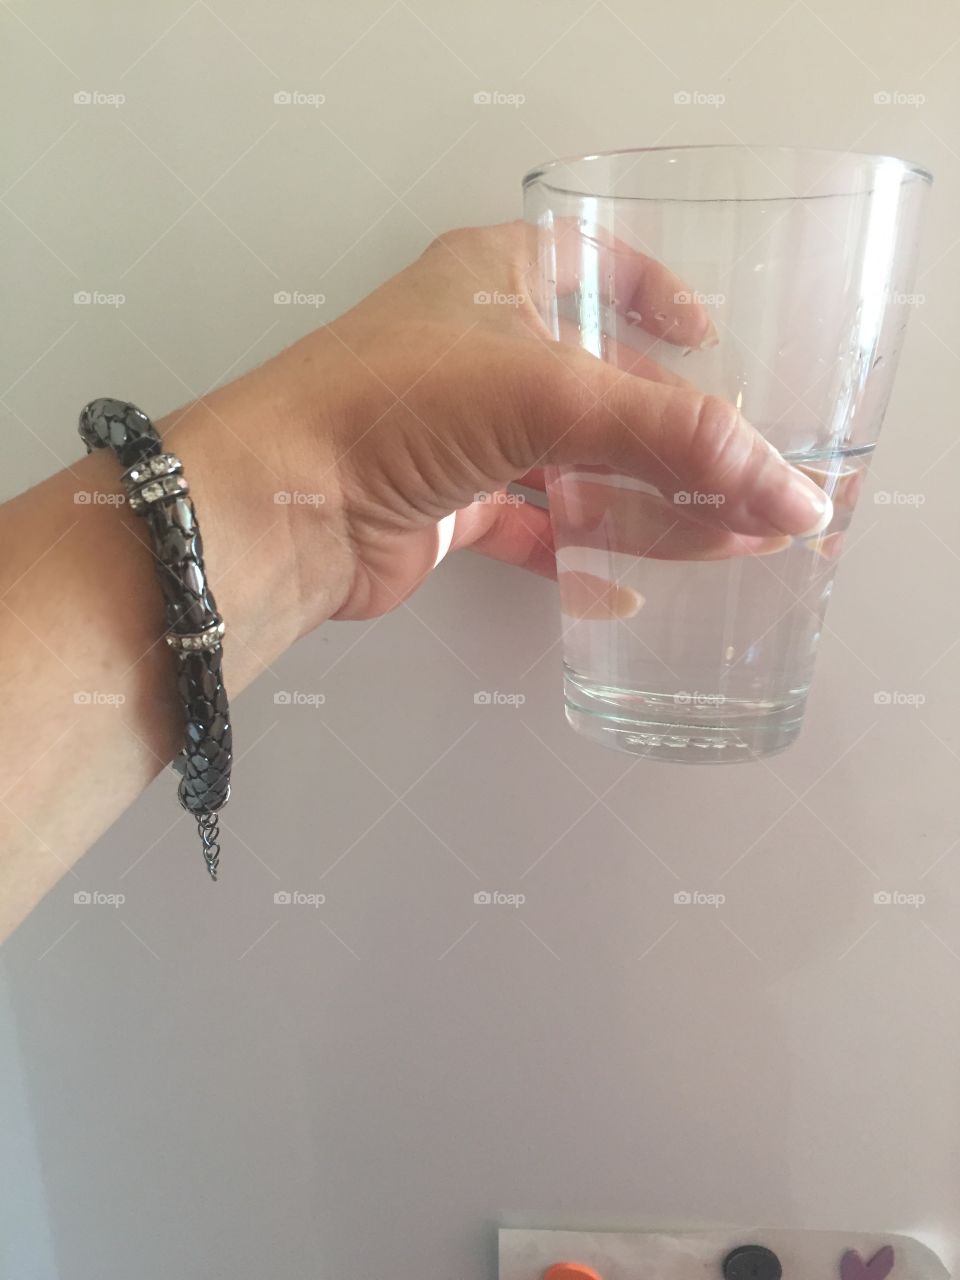 Holding a glass of water